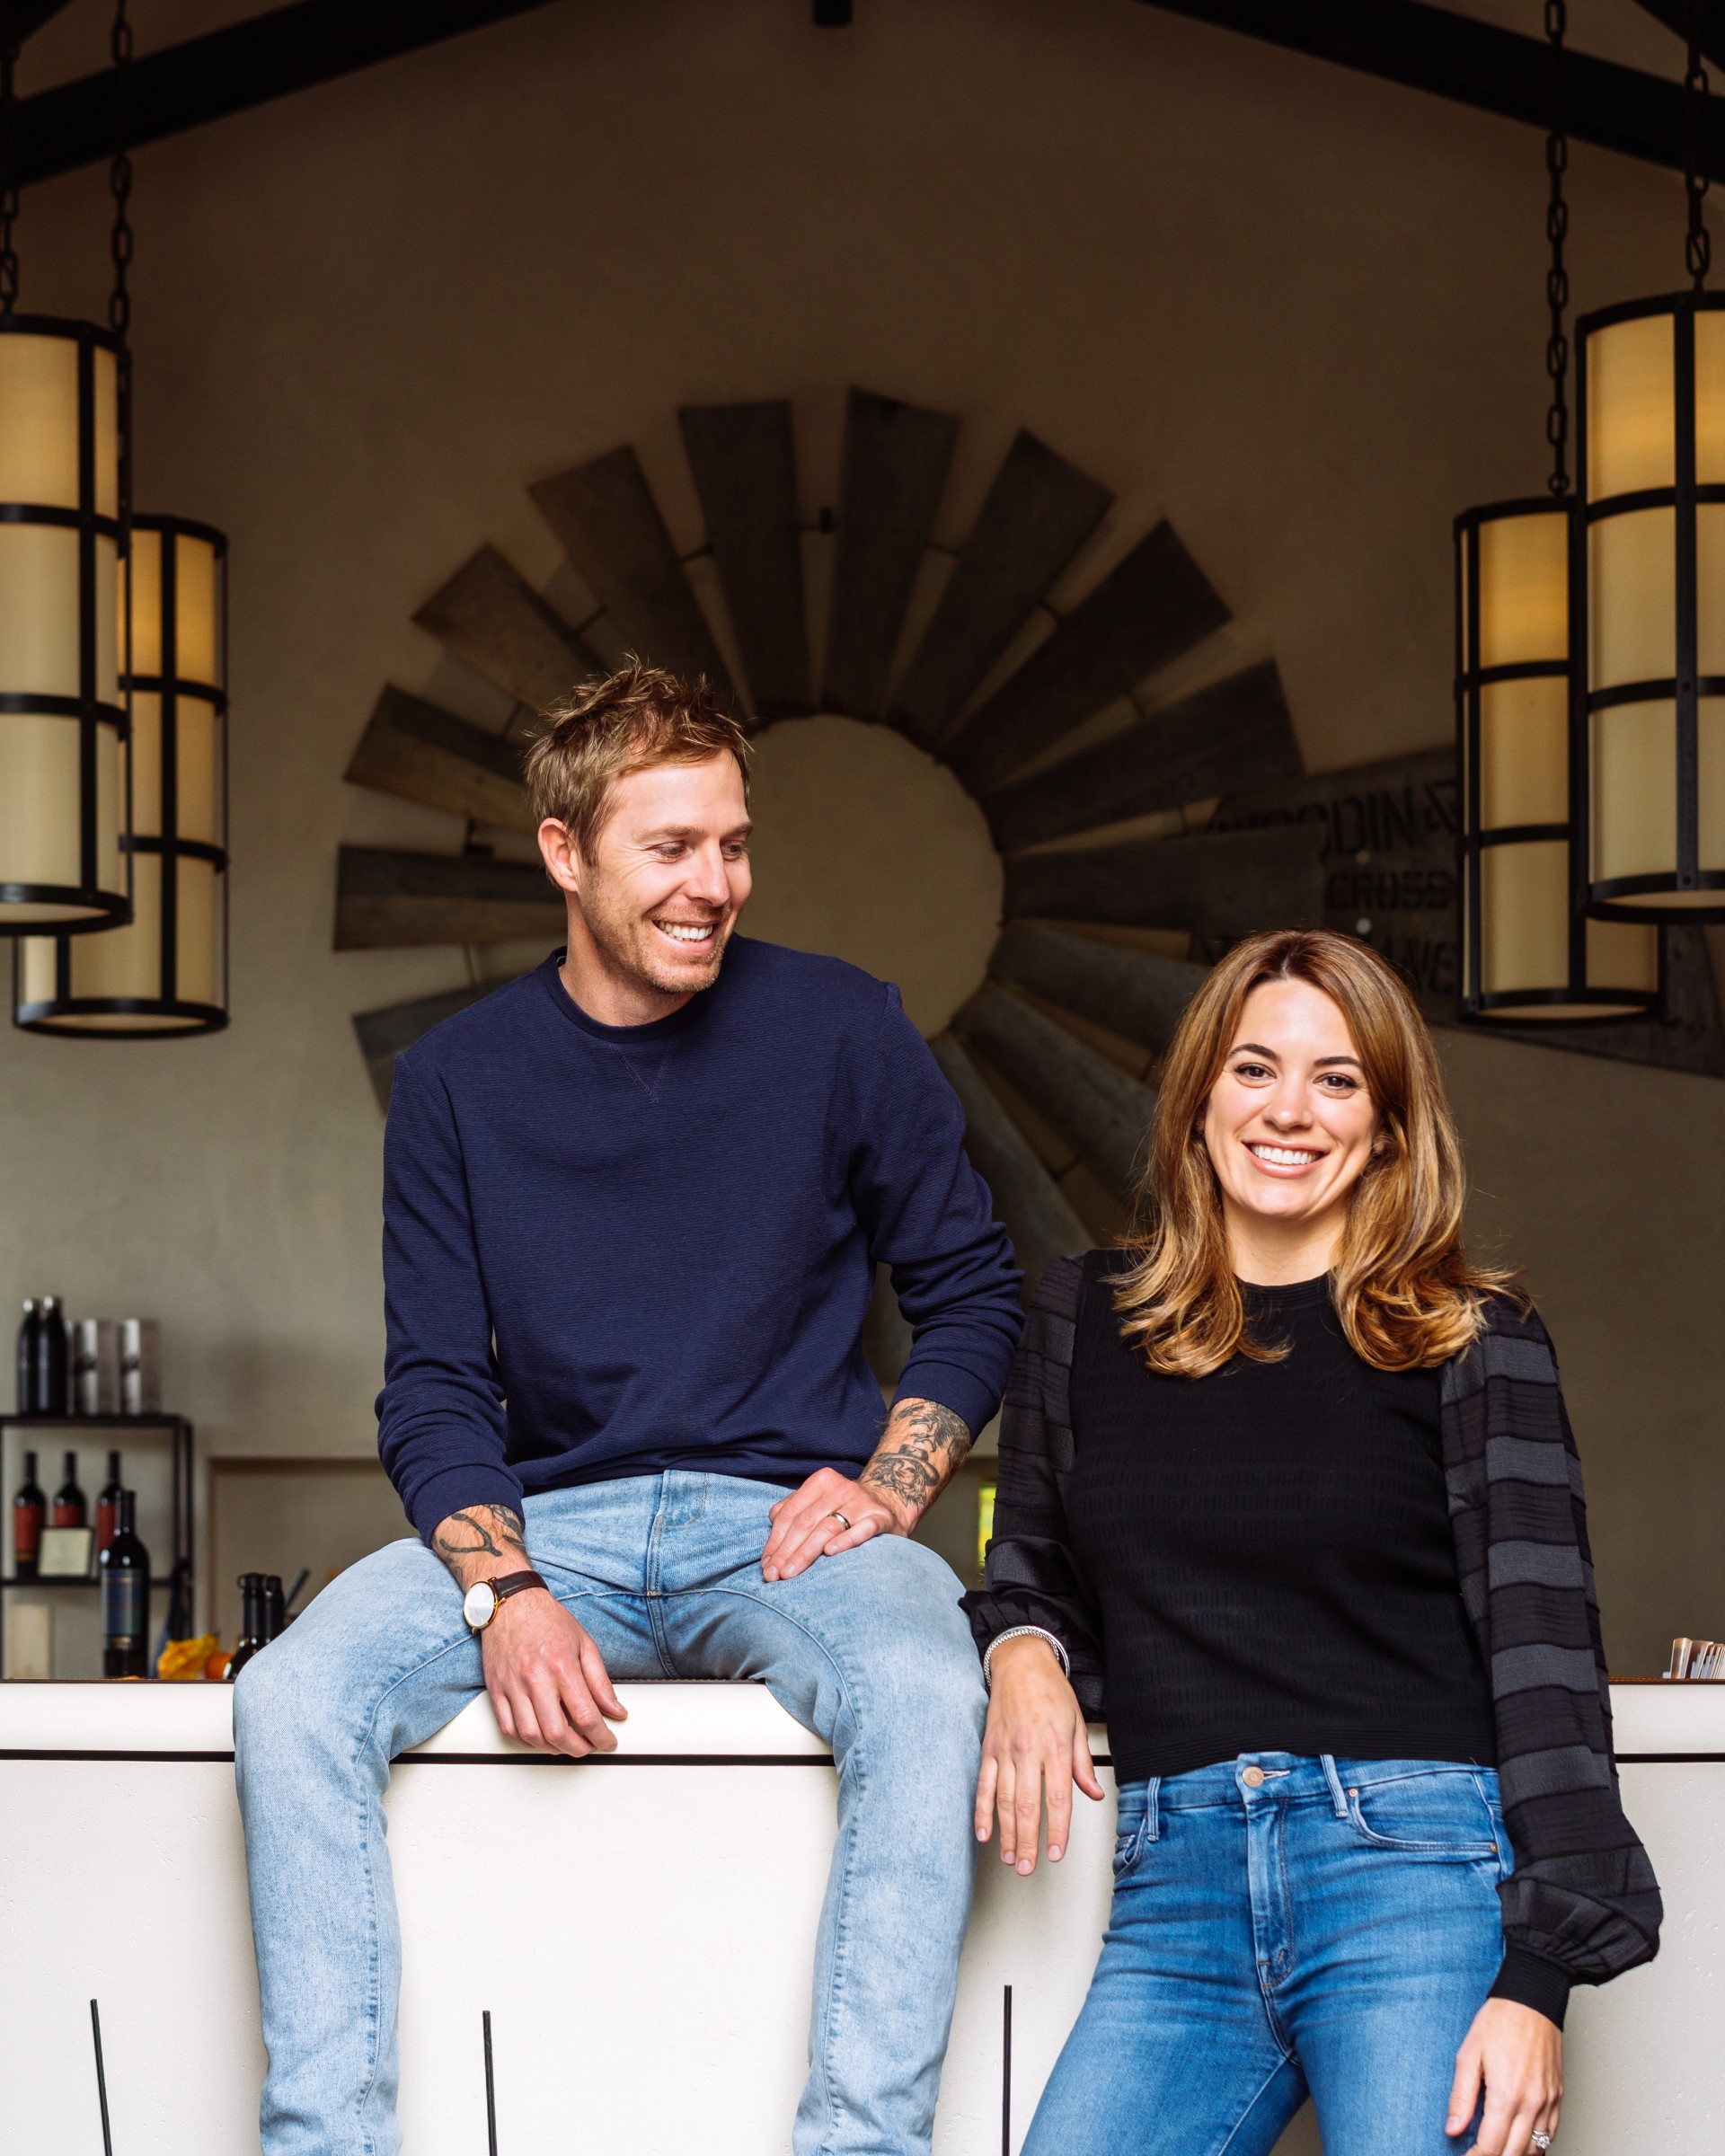 Winemaker Blair Guthrie and CEO of Steward Cellars Caroline Stewart Guthrie lean against a bar and smile at the camera.